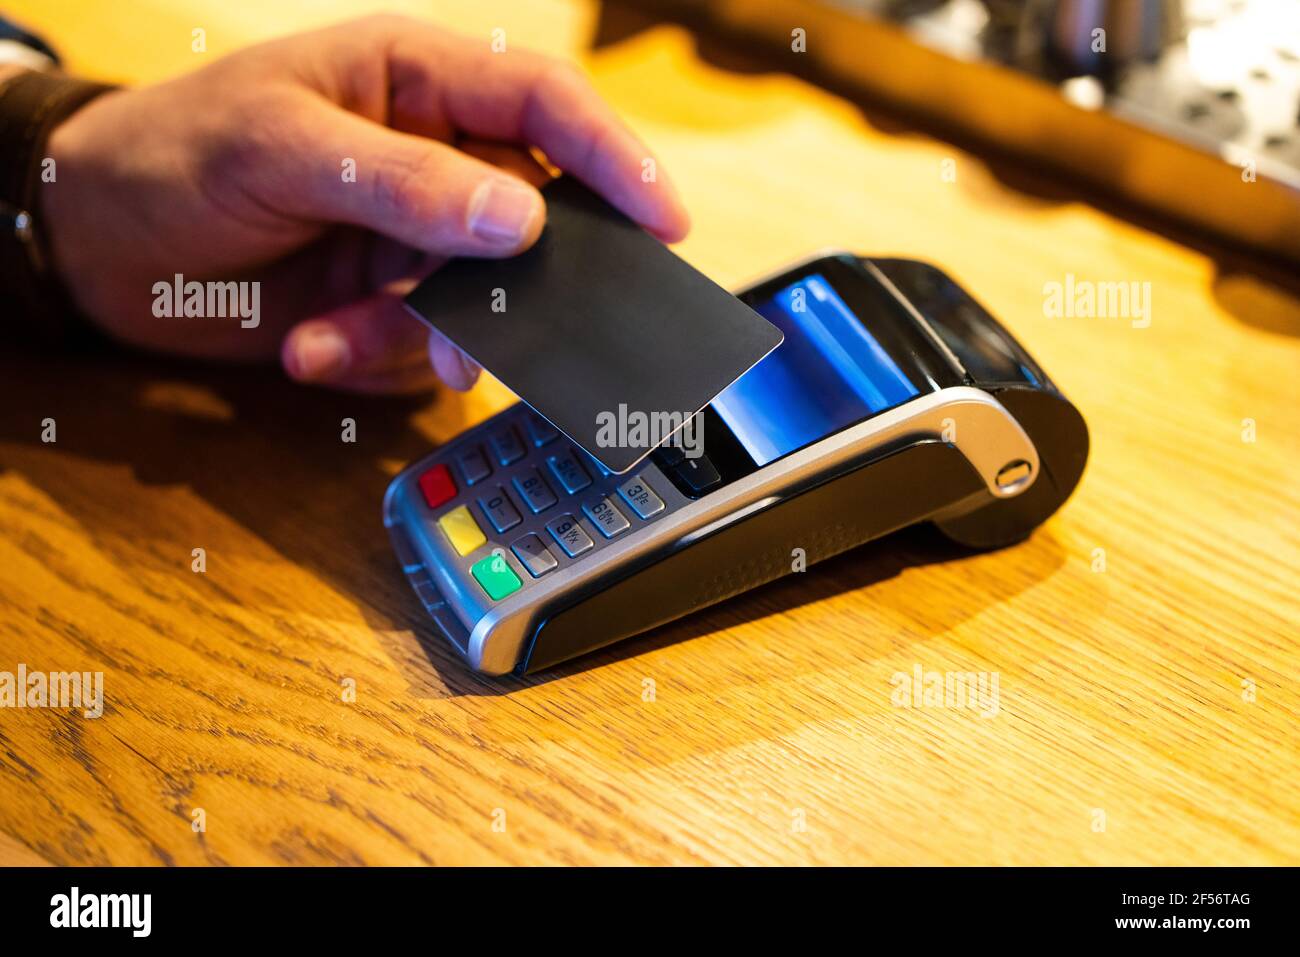 Man paying with credit card through reader machine at cafe Stock Photo